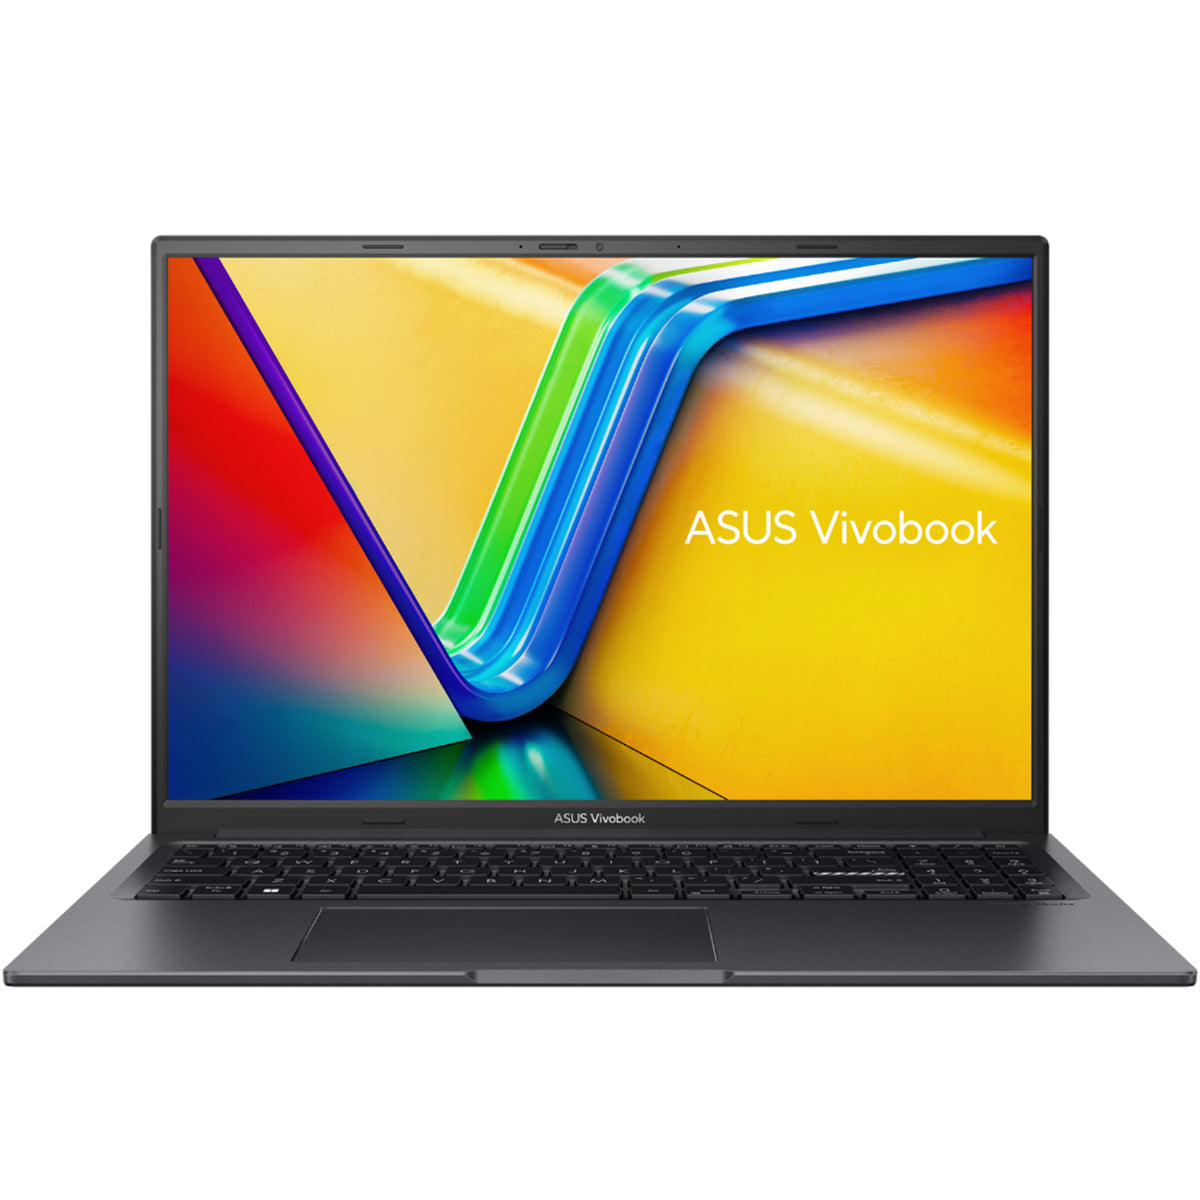 ASUS Vivobook 16X K3605VV-BB74 Daily Traditional Laptop, 16" FHD+ 1920*1200 Non-touch 120Hz, Intel Core i7-13700H, NVIDIA GeForce RTX 4060, 16GB DDR4 SODIMM, 512GB PCIe M.2 SSD, Wi-Fi 6, Windows 11 Home, Black